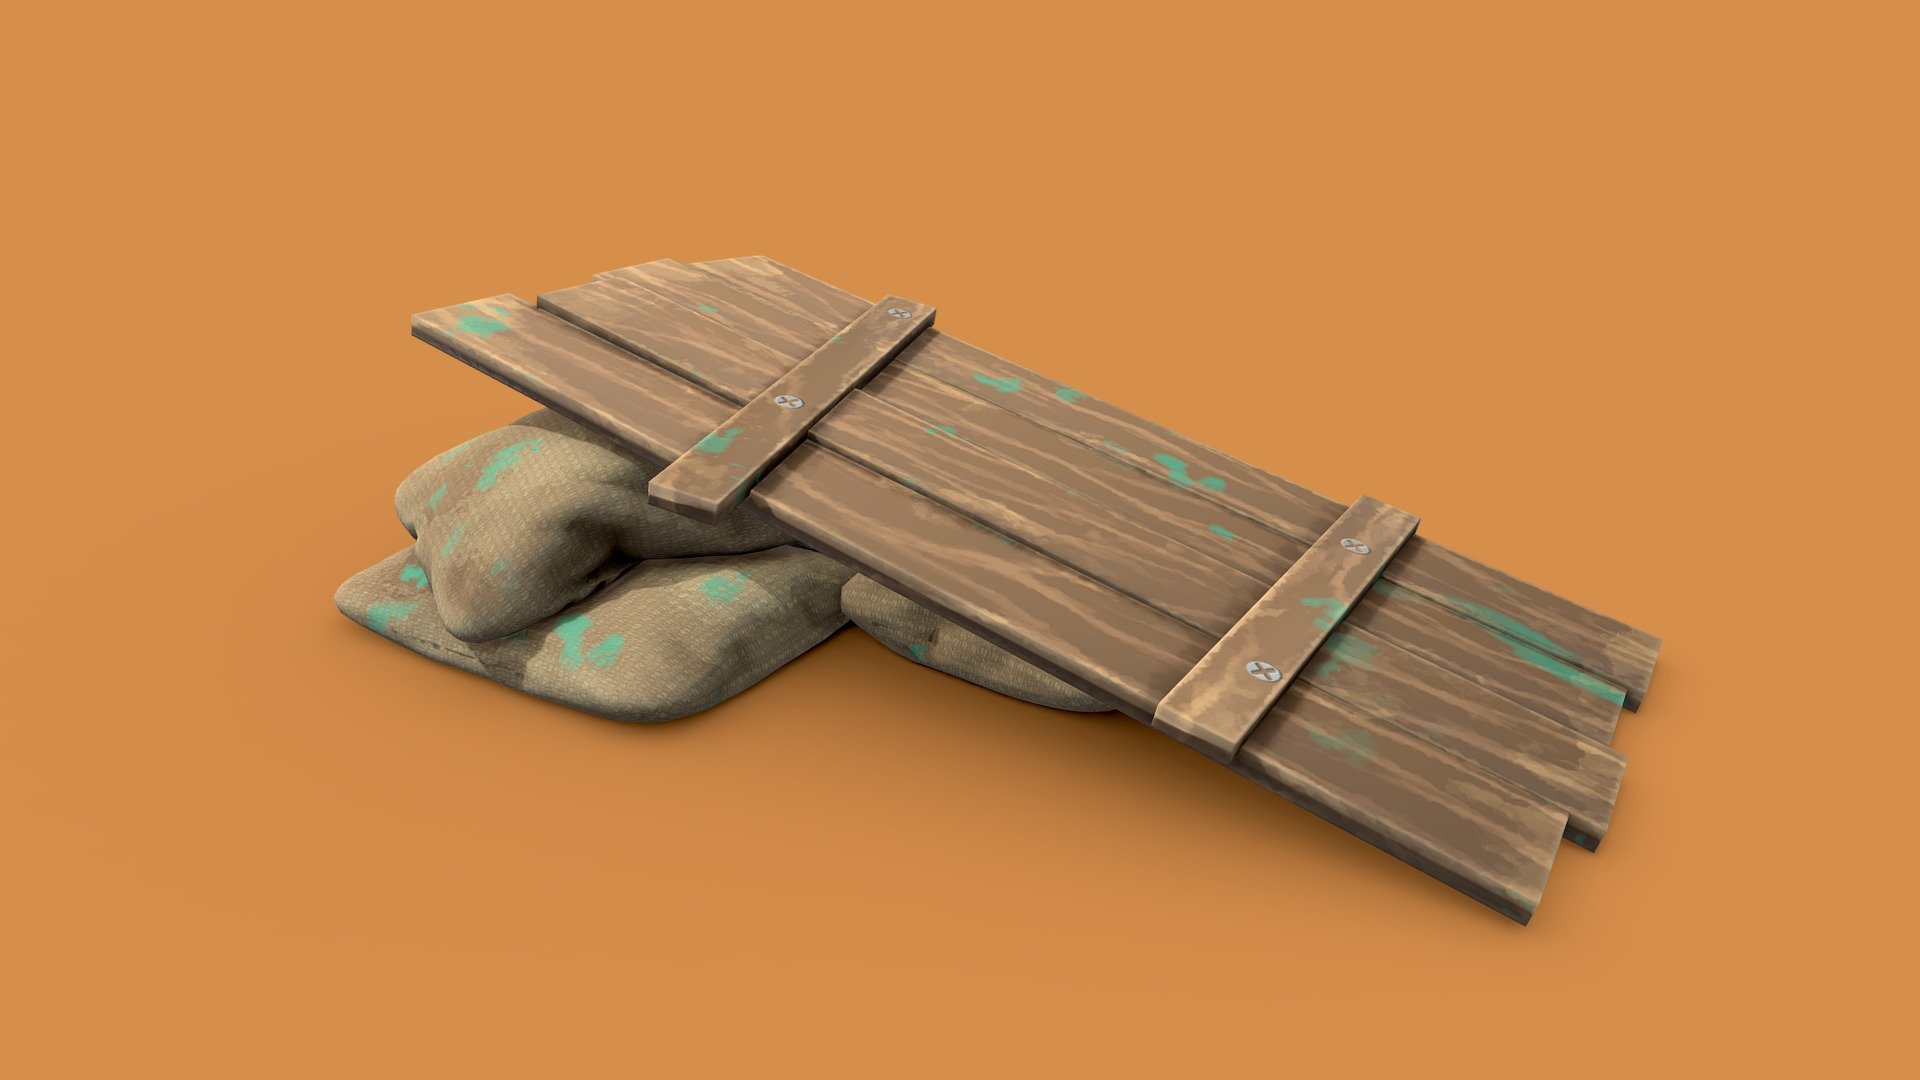 Low Poly Ramp for your renders and games

Textures:

Diffuse color, Roughness, Metallic, Height, Normal

All textures are 2K

Files Formats:

Blend

Fbx

Obj - Ramp - Buy Royalty Free 3D model by Vanessa Araújo (@vanessa3d) 3d model